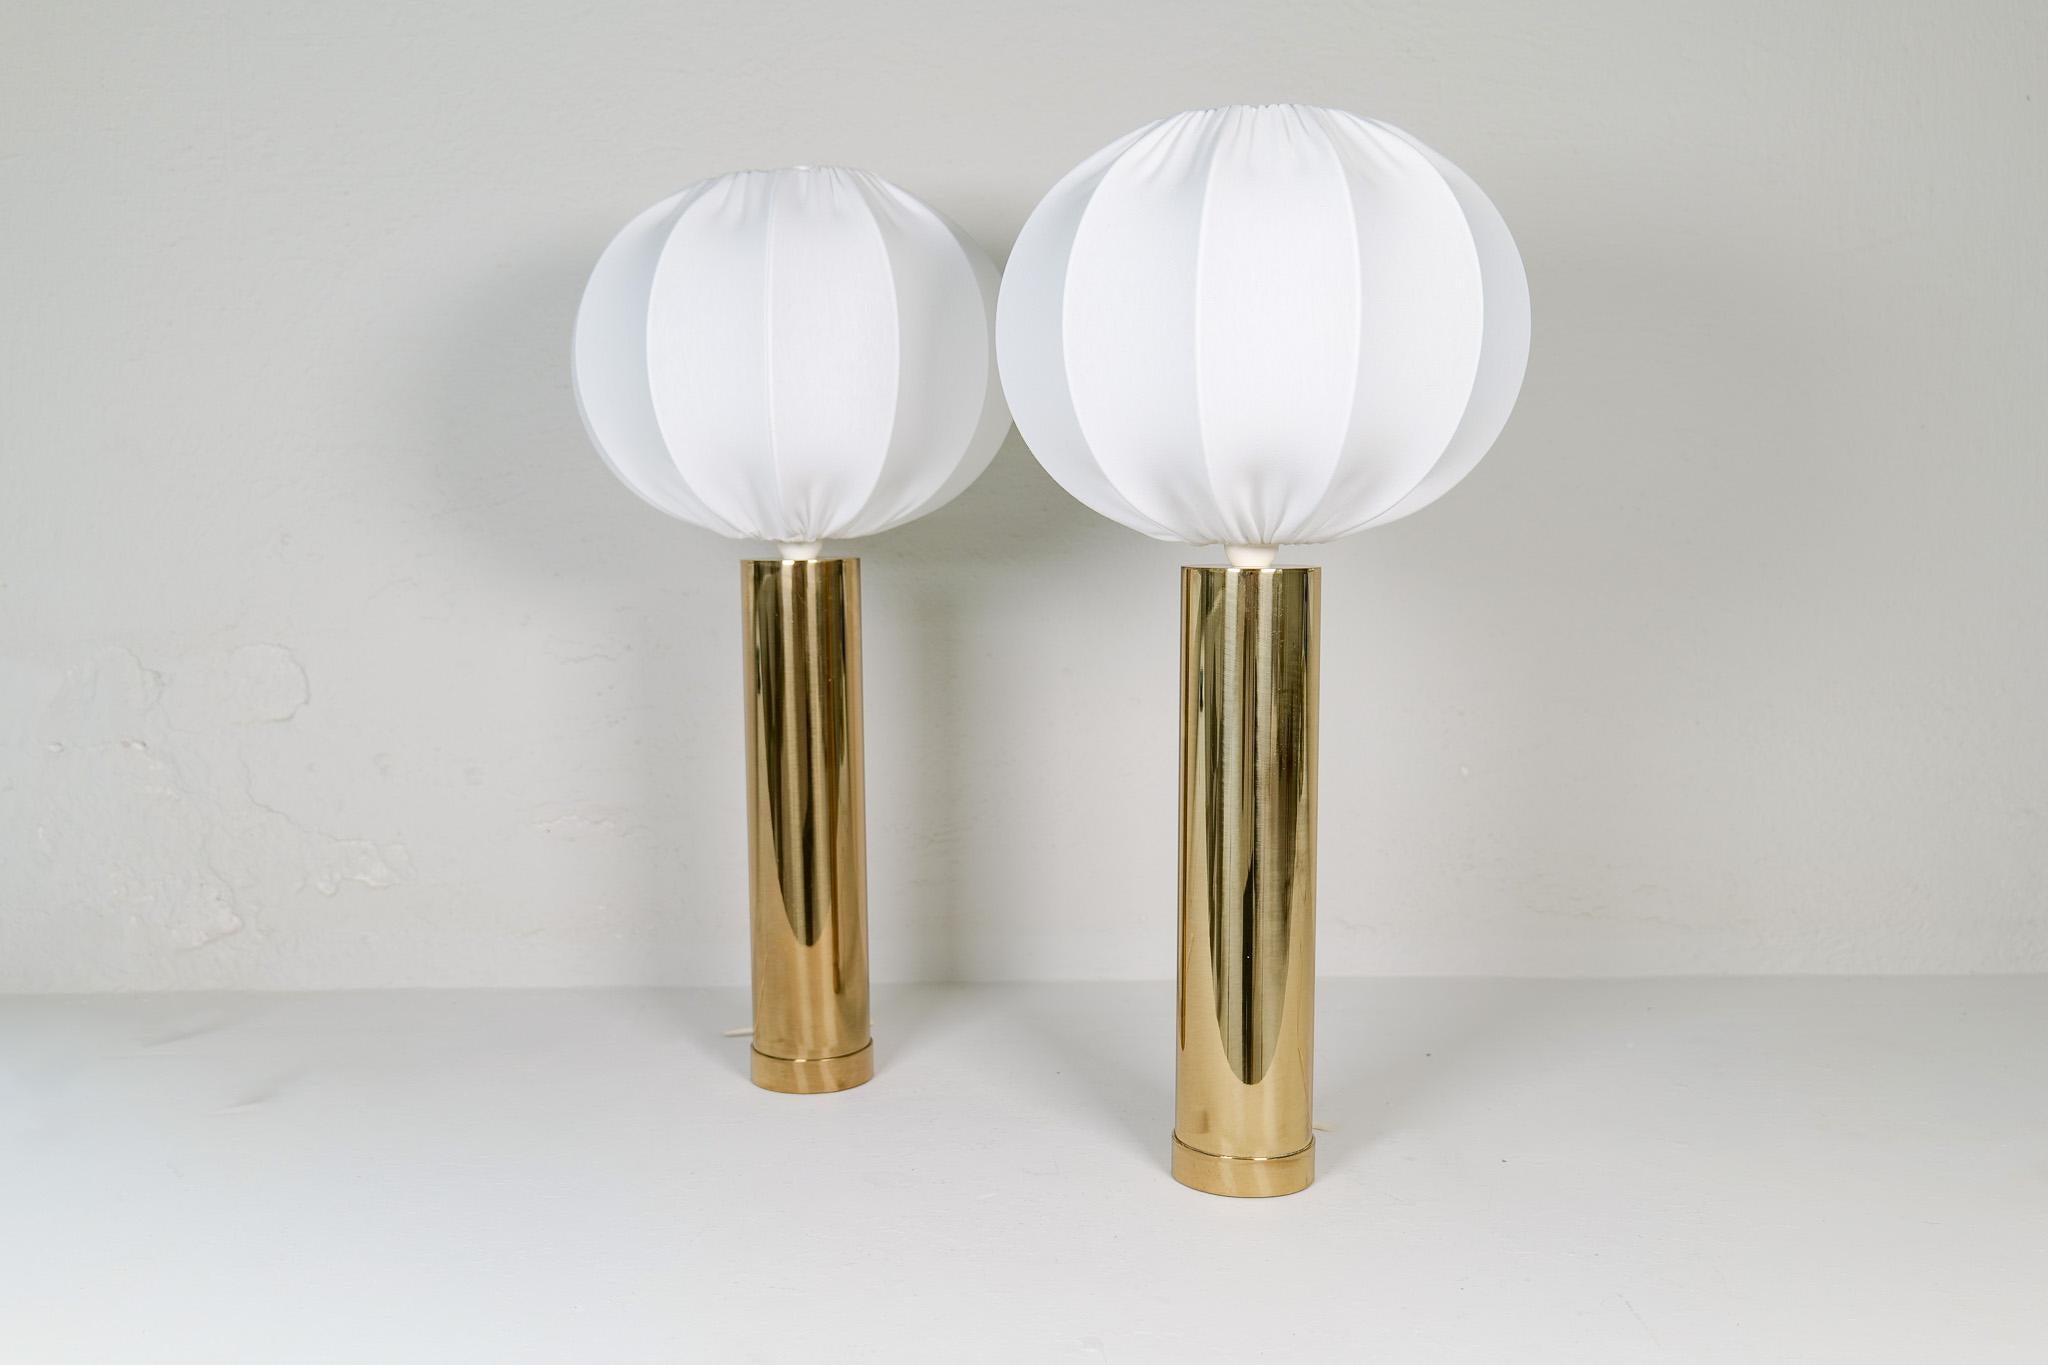 Large and heavy pair of cylinder-shaped table lamps in brass. Bergboms design with all new cotton shades, made in Sweden. Cast iron base finished in brass. This pair of table lamps will give that great look to a vintage home or a twist to the modern